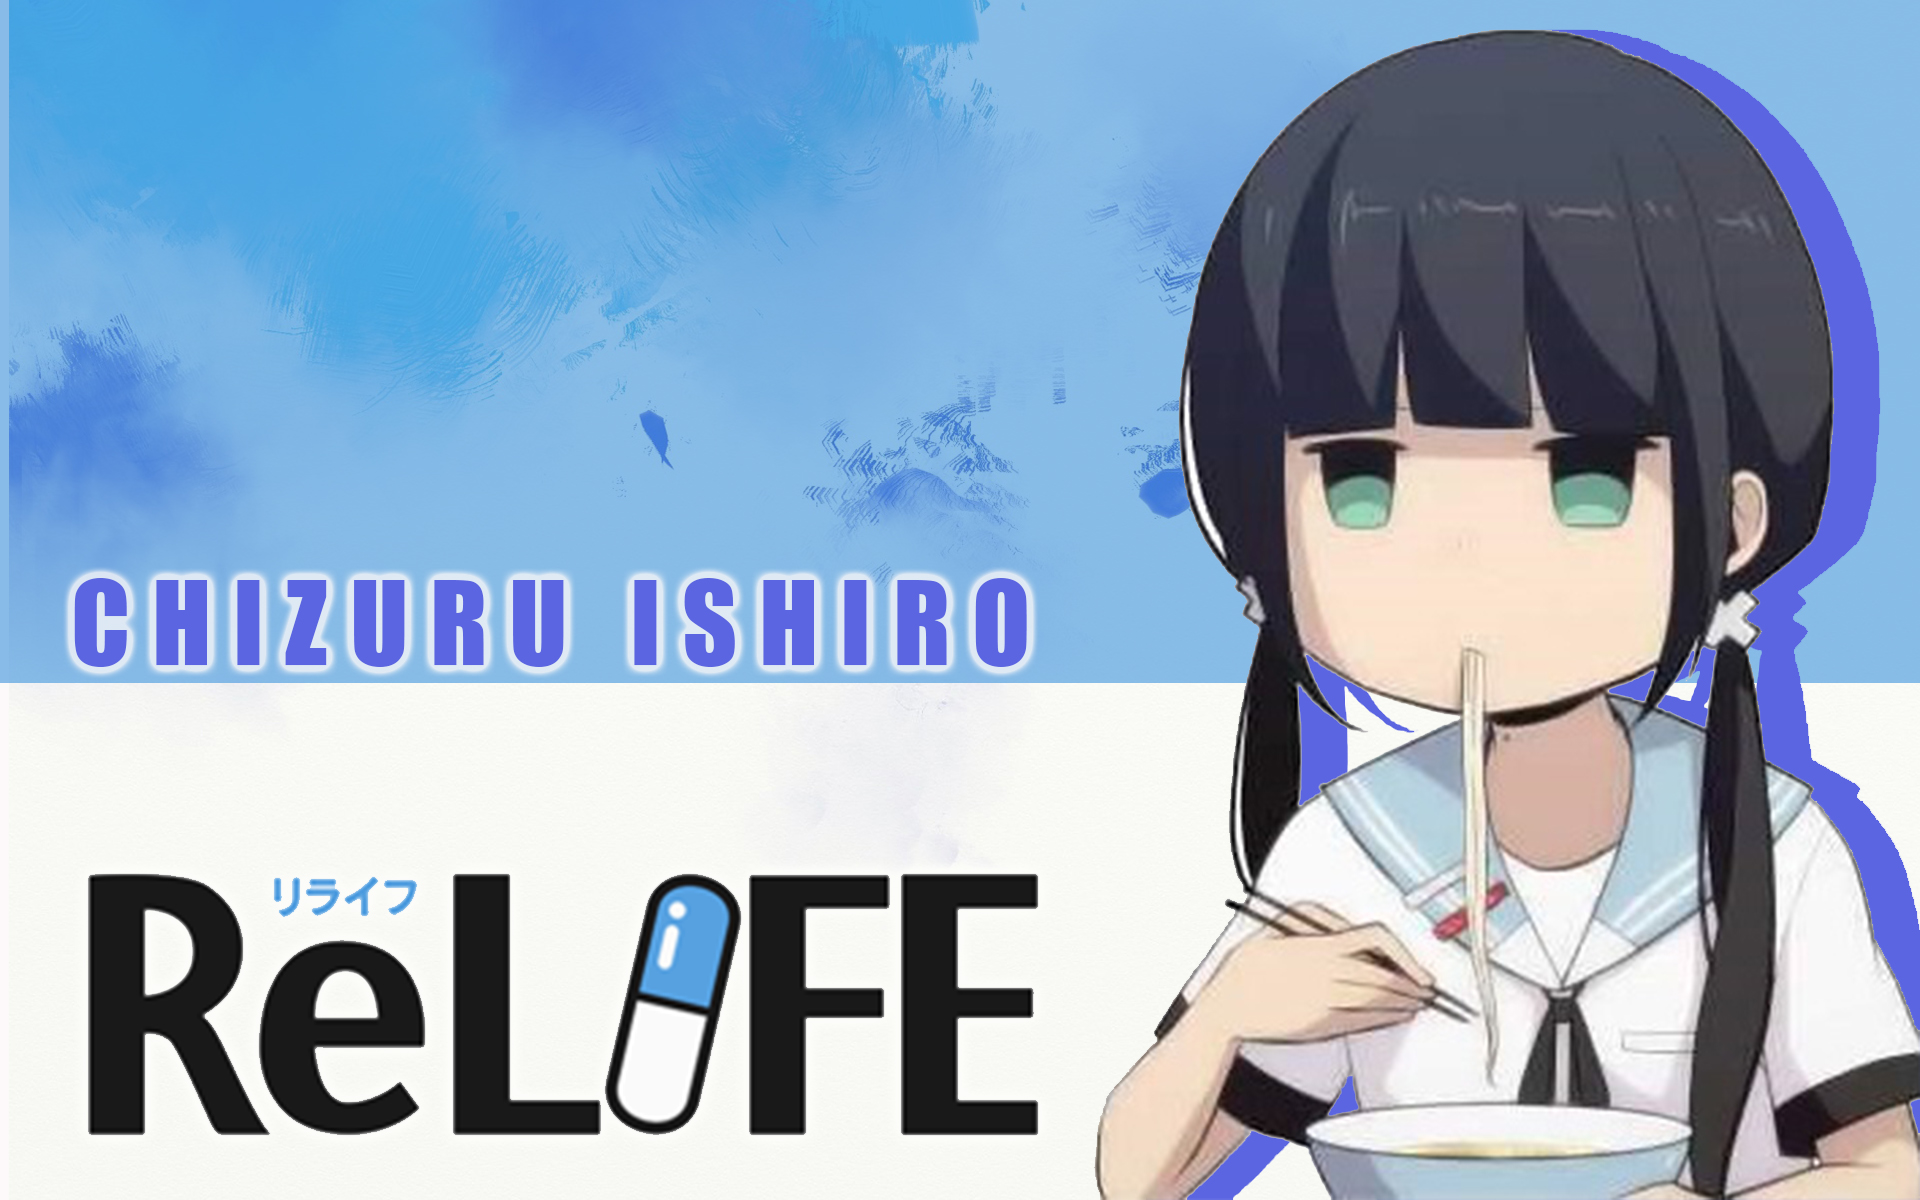 ReLIFE #8